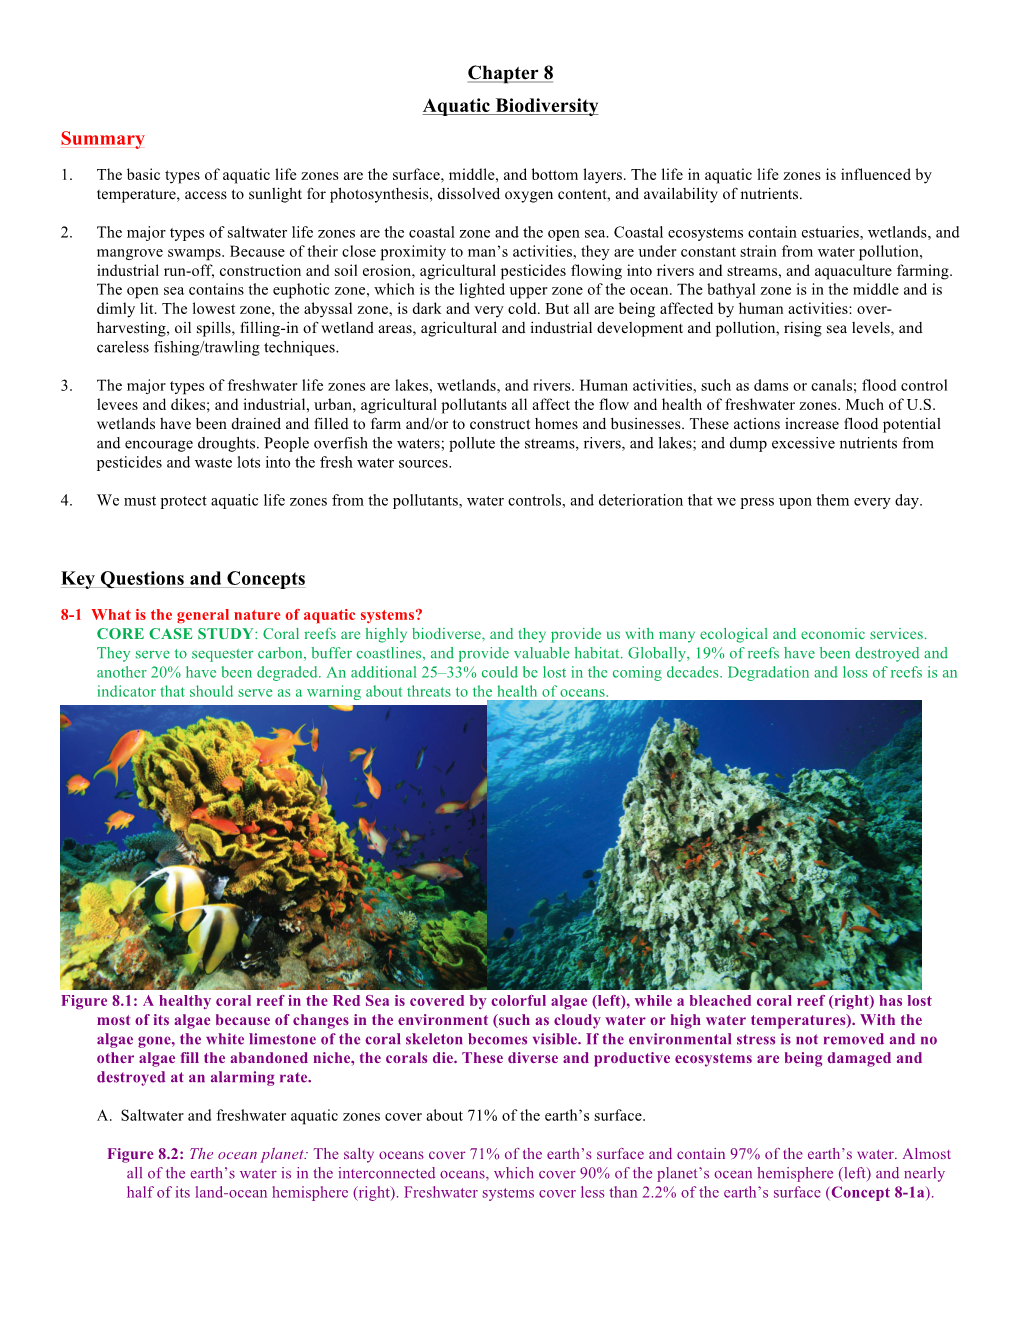 Chapter 8 Aquatic Biodiversity Summary Key Questions and Concepts